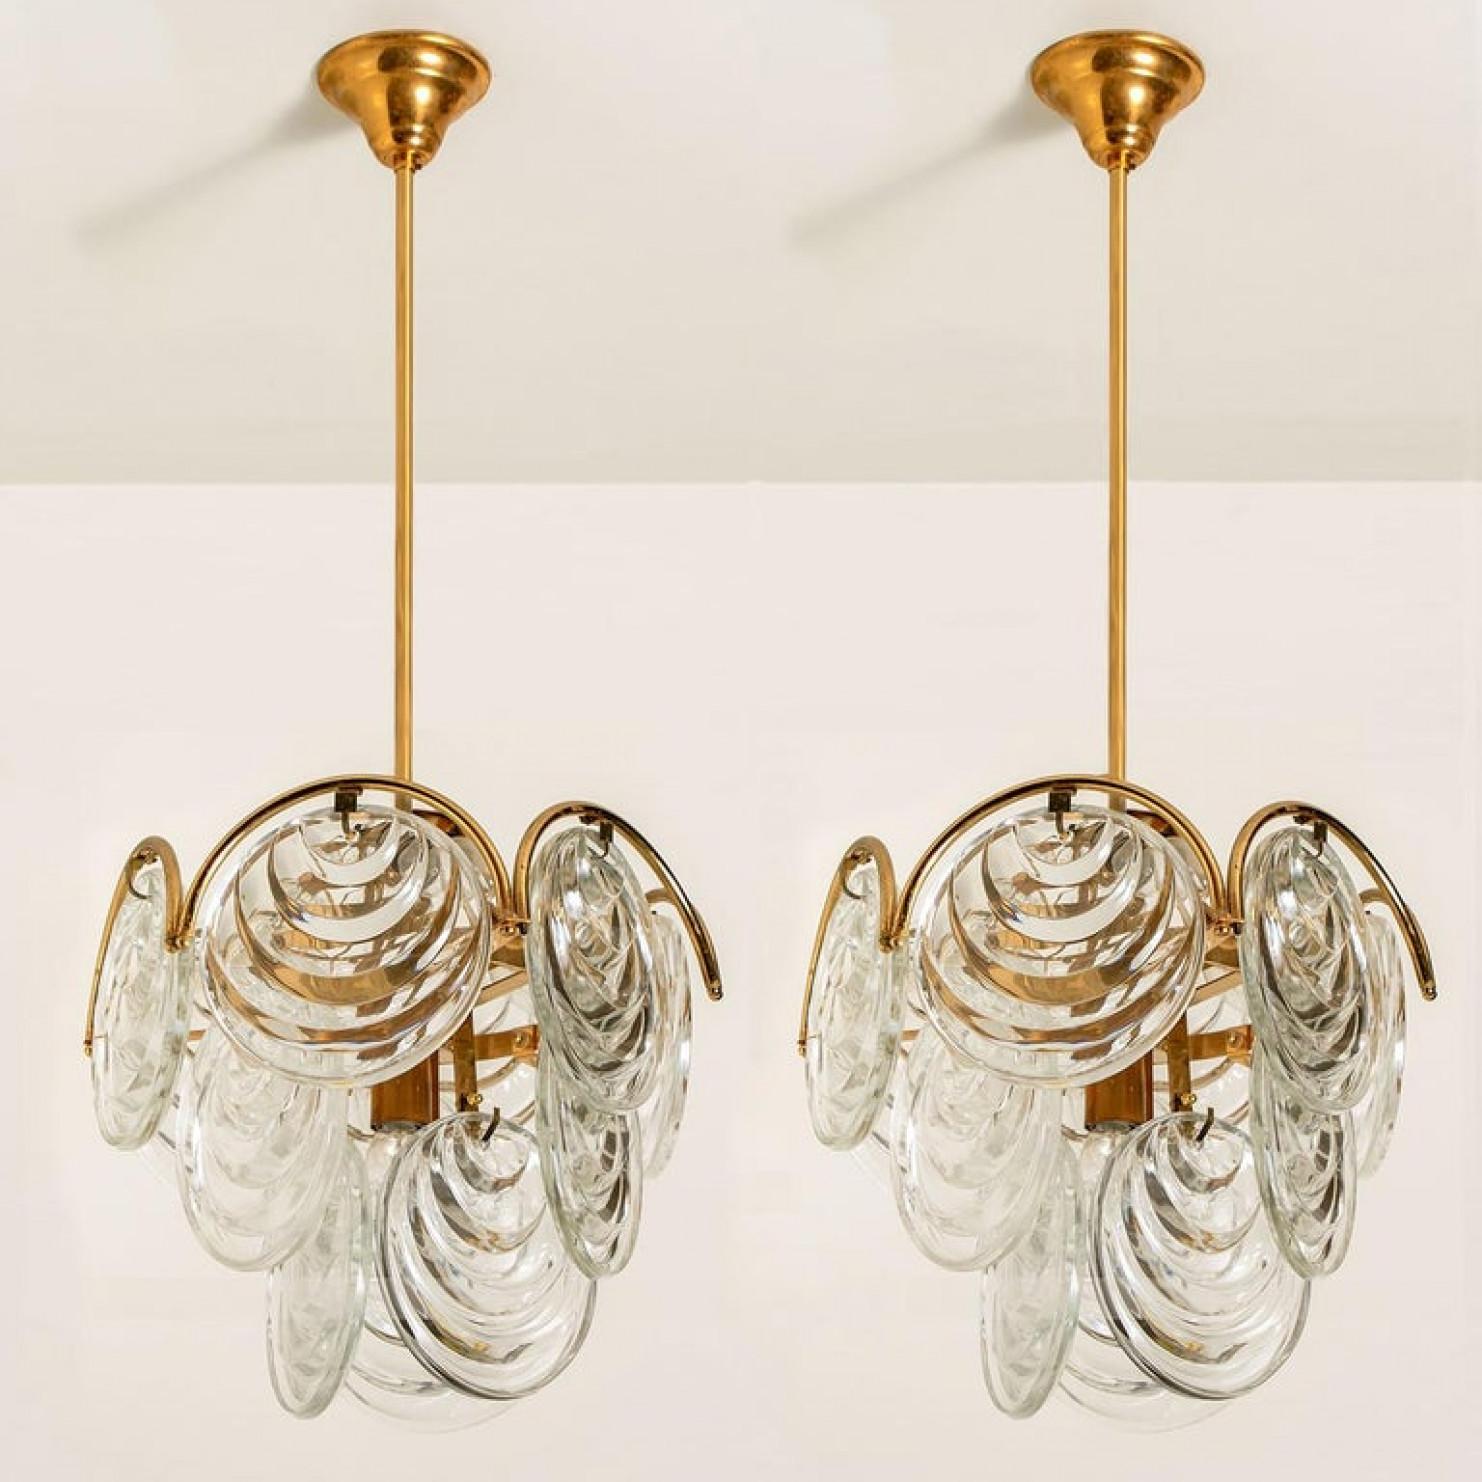 Mid-Century Modern 1 of the 2 of Glass and Brass Two Tiers Light Fixtures, 1970s For Sale